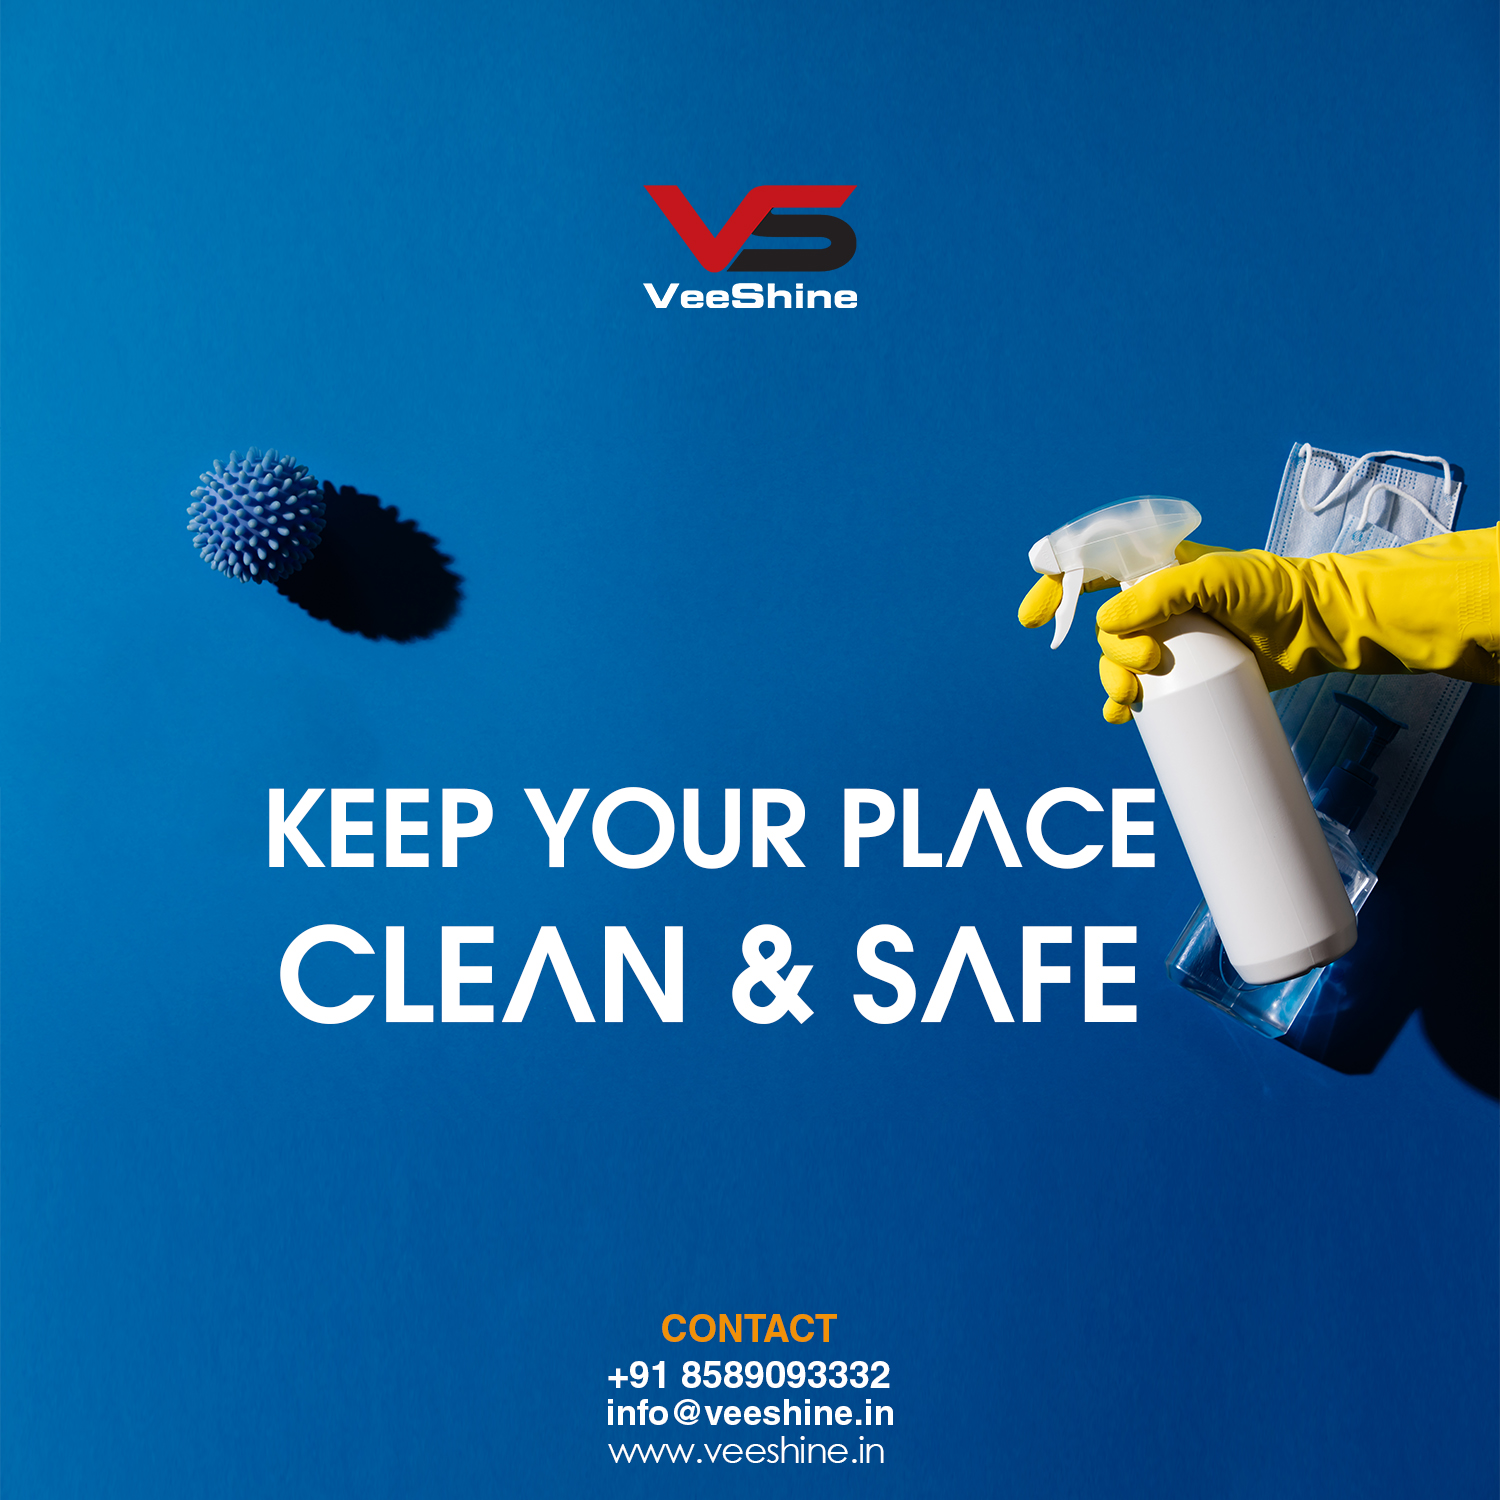 VeeShine Housekeeping and cleaning service in Kochi